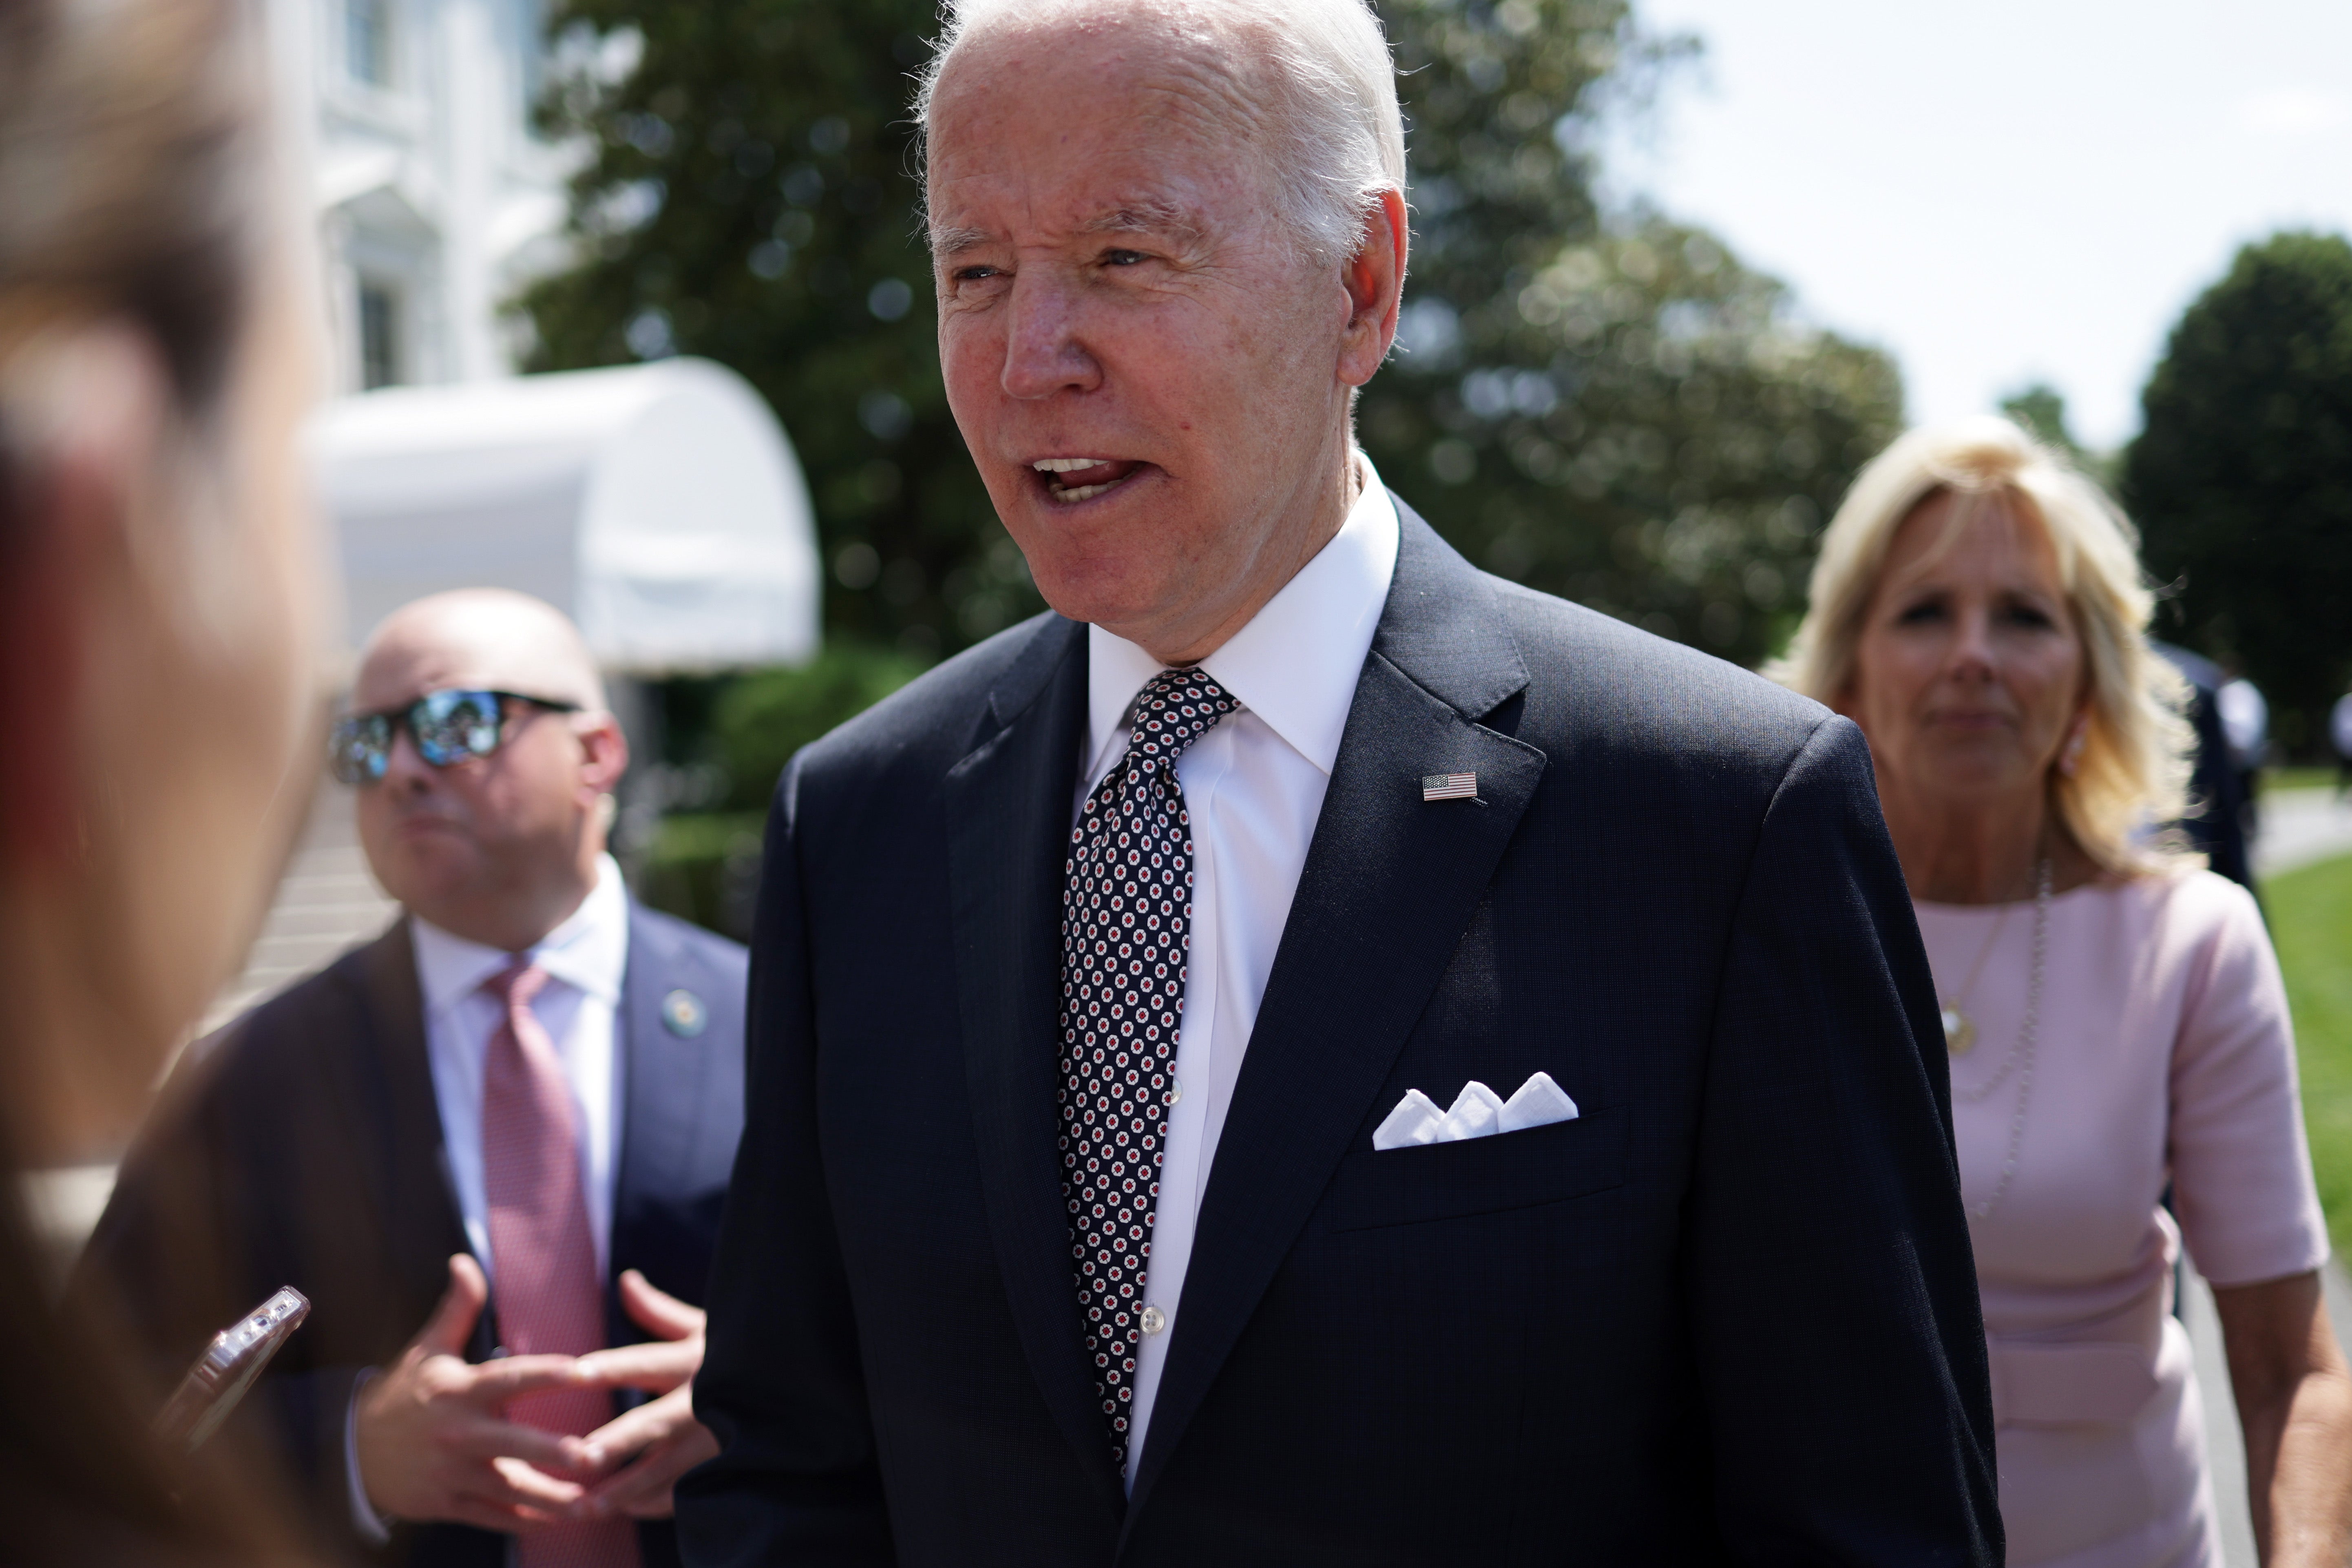 Biden likes to duke it out with the press when he gets a tough question -- here are 3 epic examples